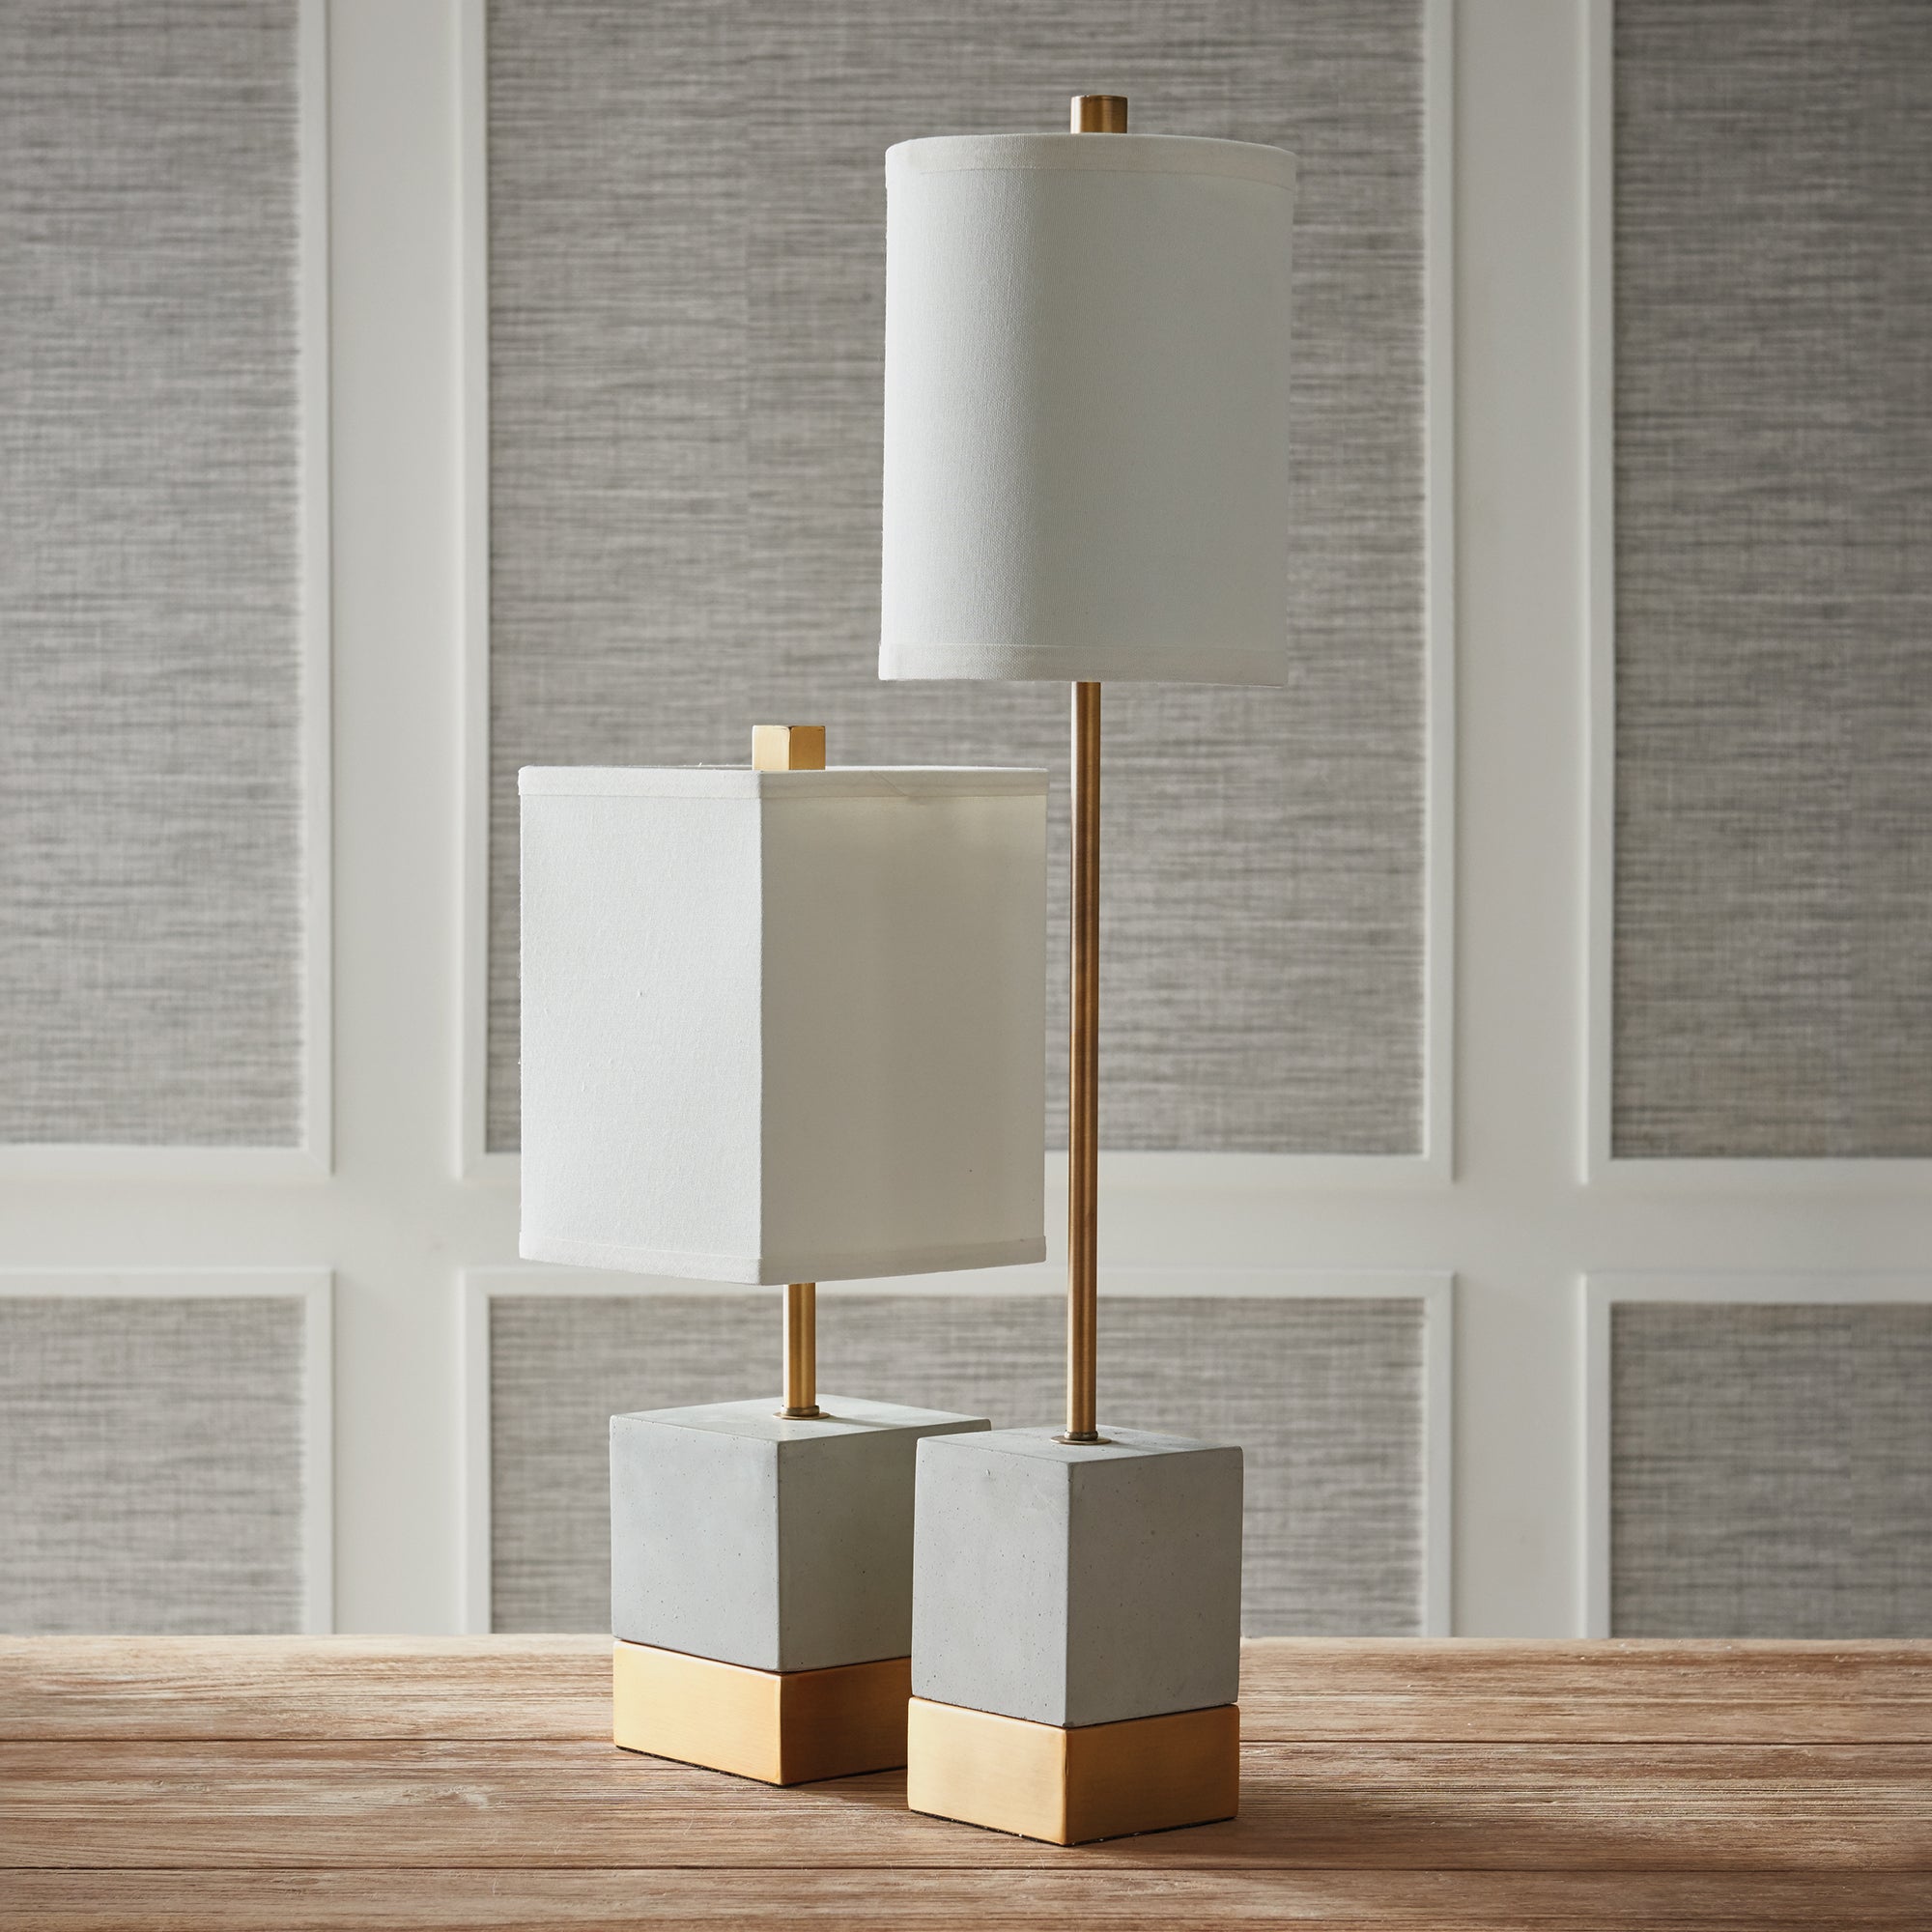 An unexpected mix of cement and brass accents make this lamp a stand out piece. The tall, narrow base and tailored shade are well-designed details not to be missed. Amethyst Home provides interior design, new construction, custom furniture, and area rugs in the Park City metro area.